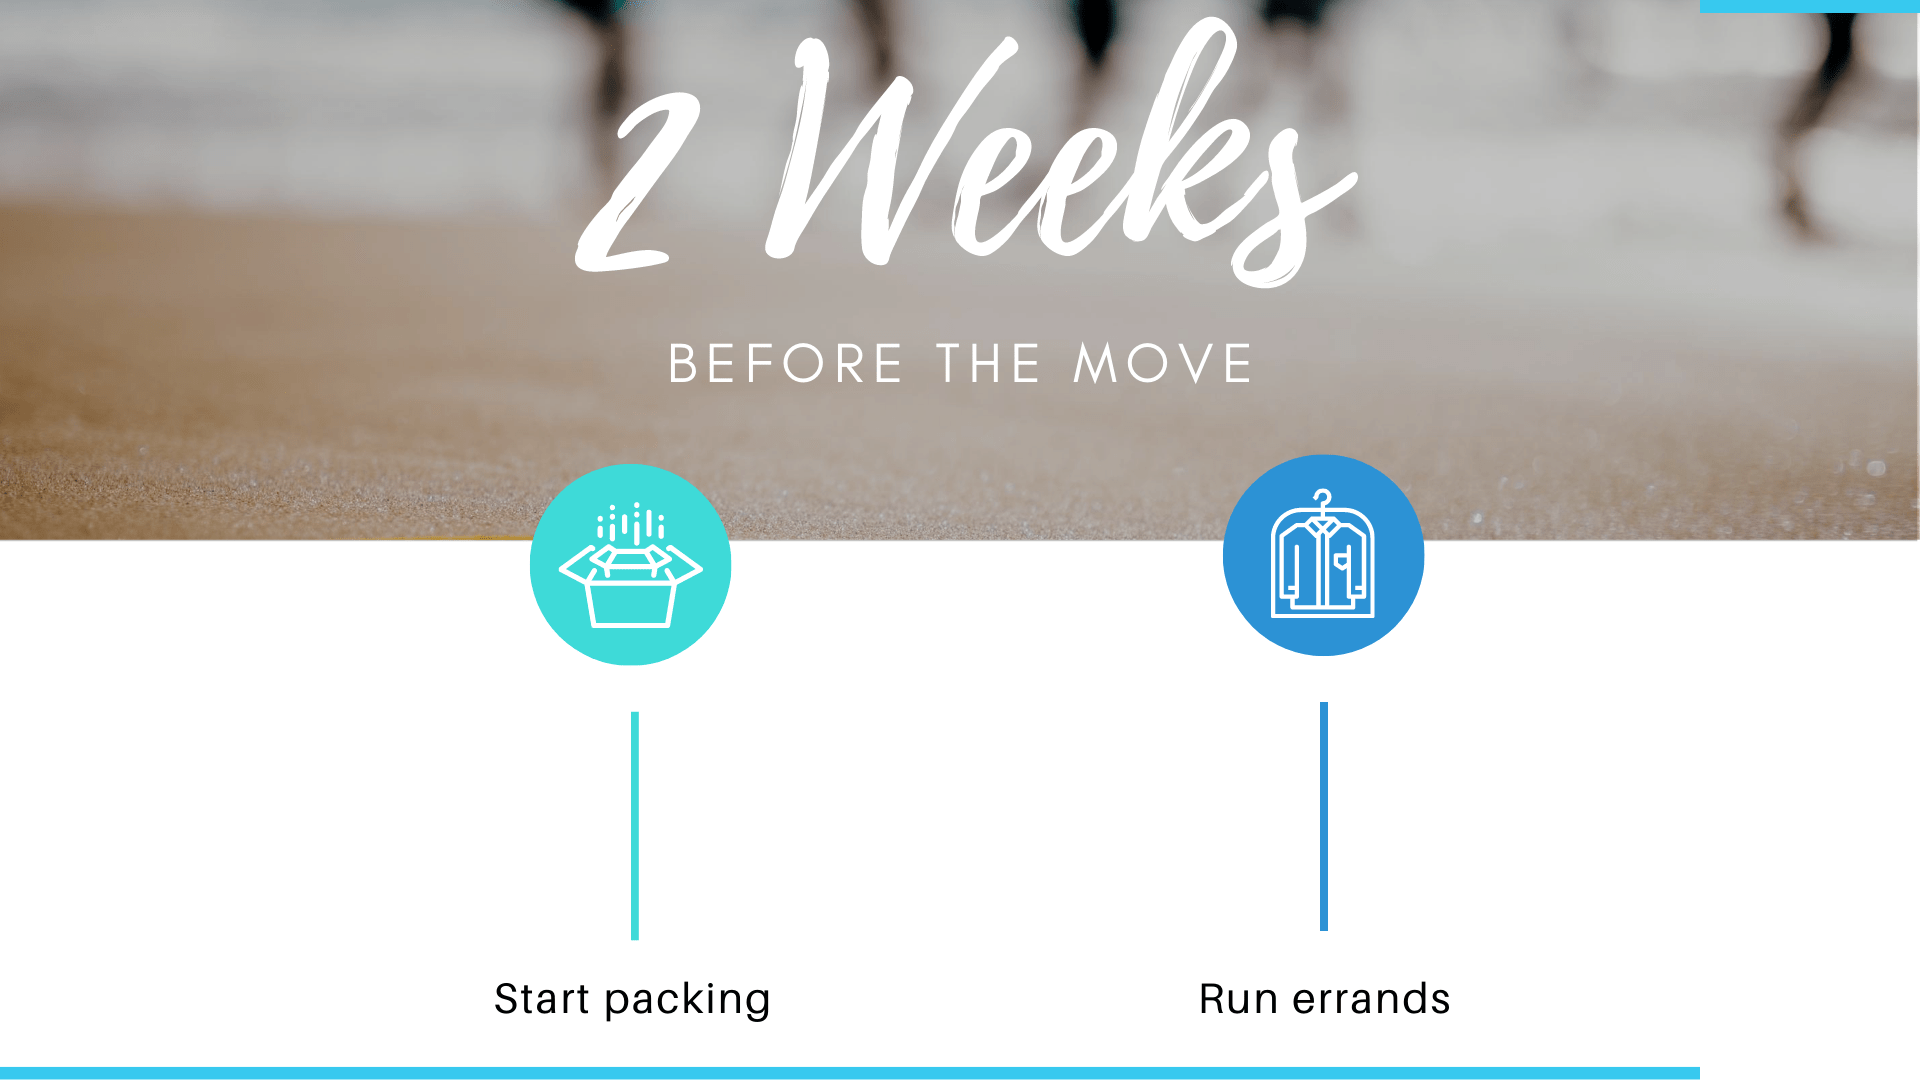 What to do 2 weeks before the move date